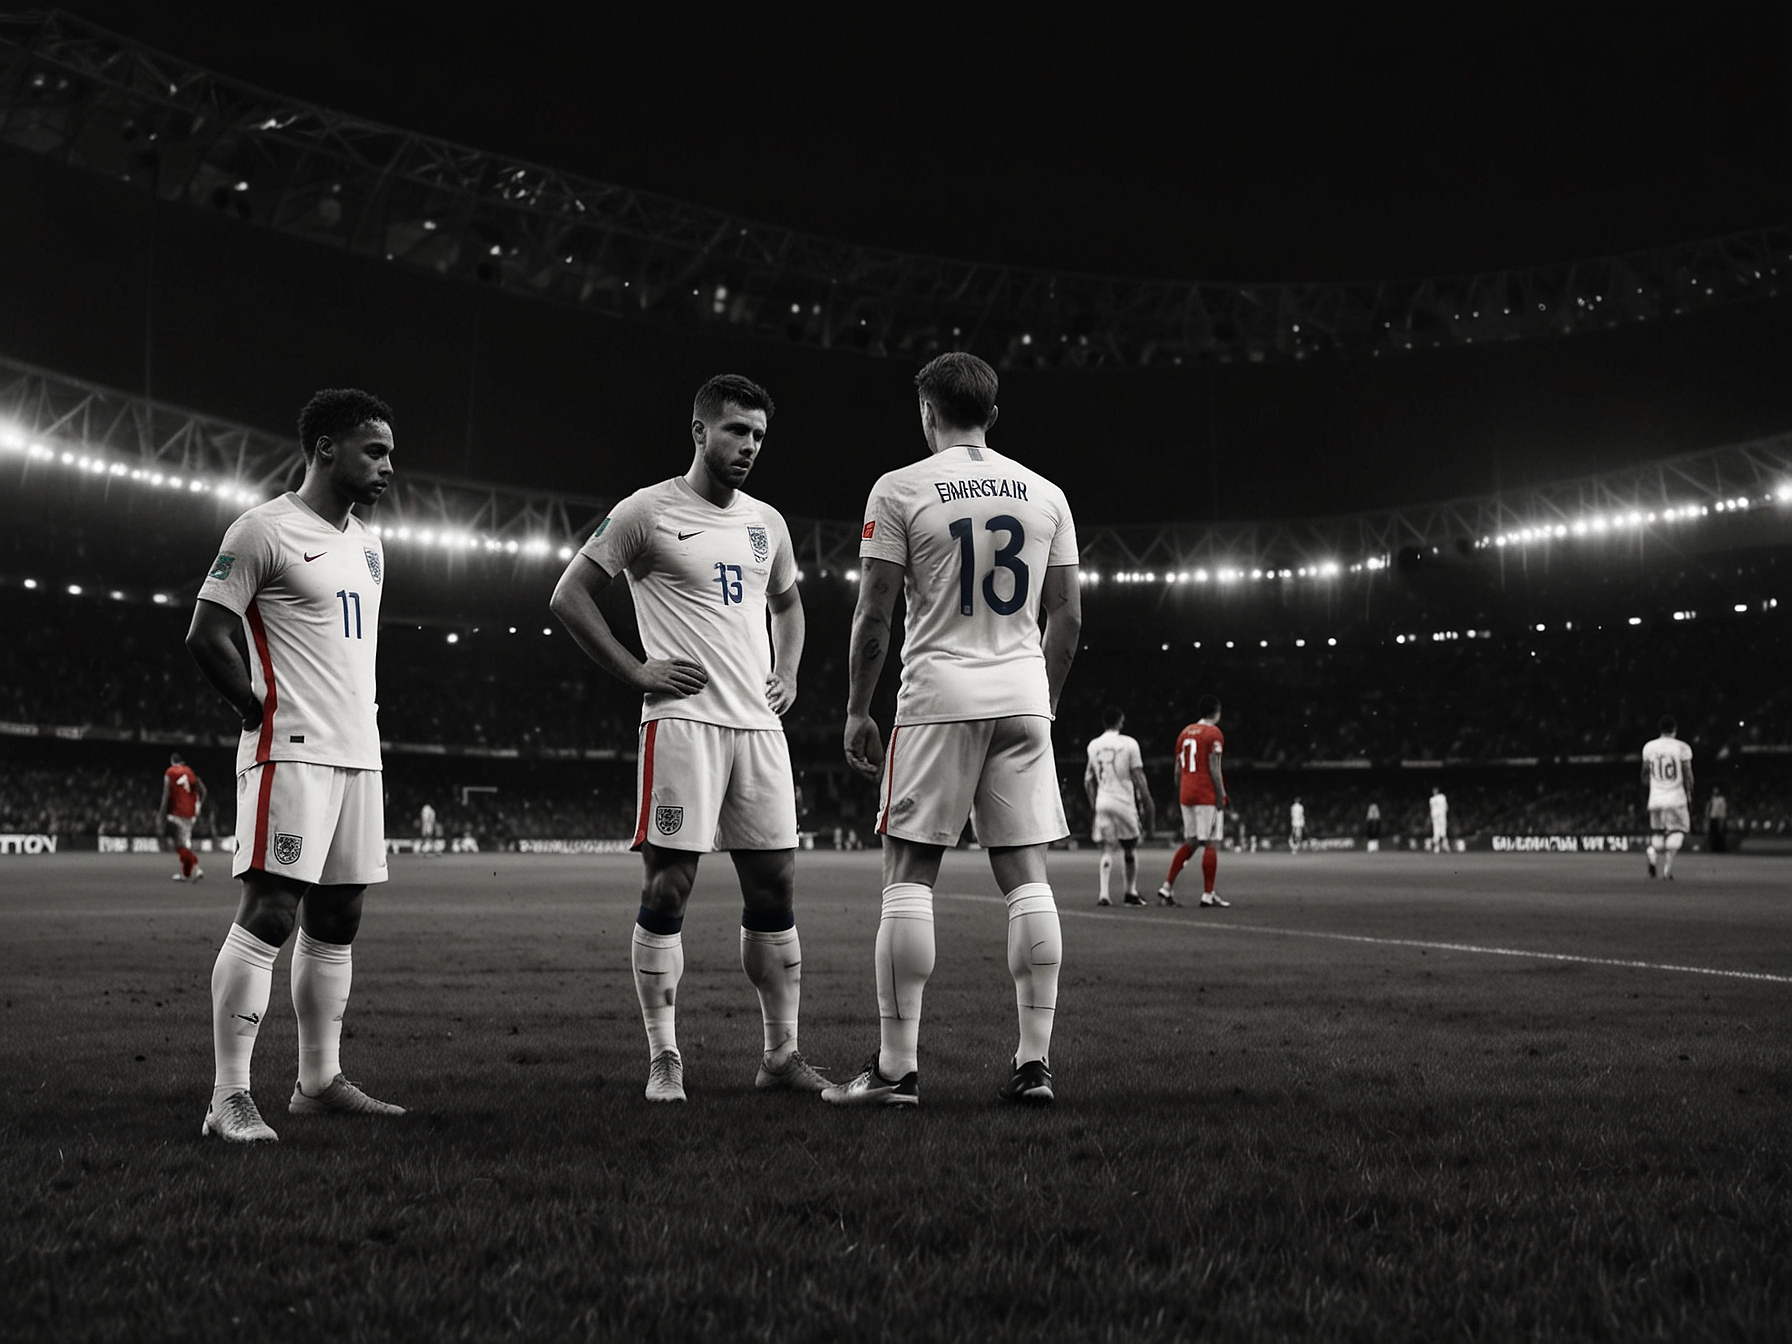 Players from the England national team look dejected on the field during their draw with Denmark, highlighting the struggles faced in breaking down the opposition defense.